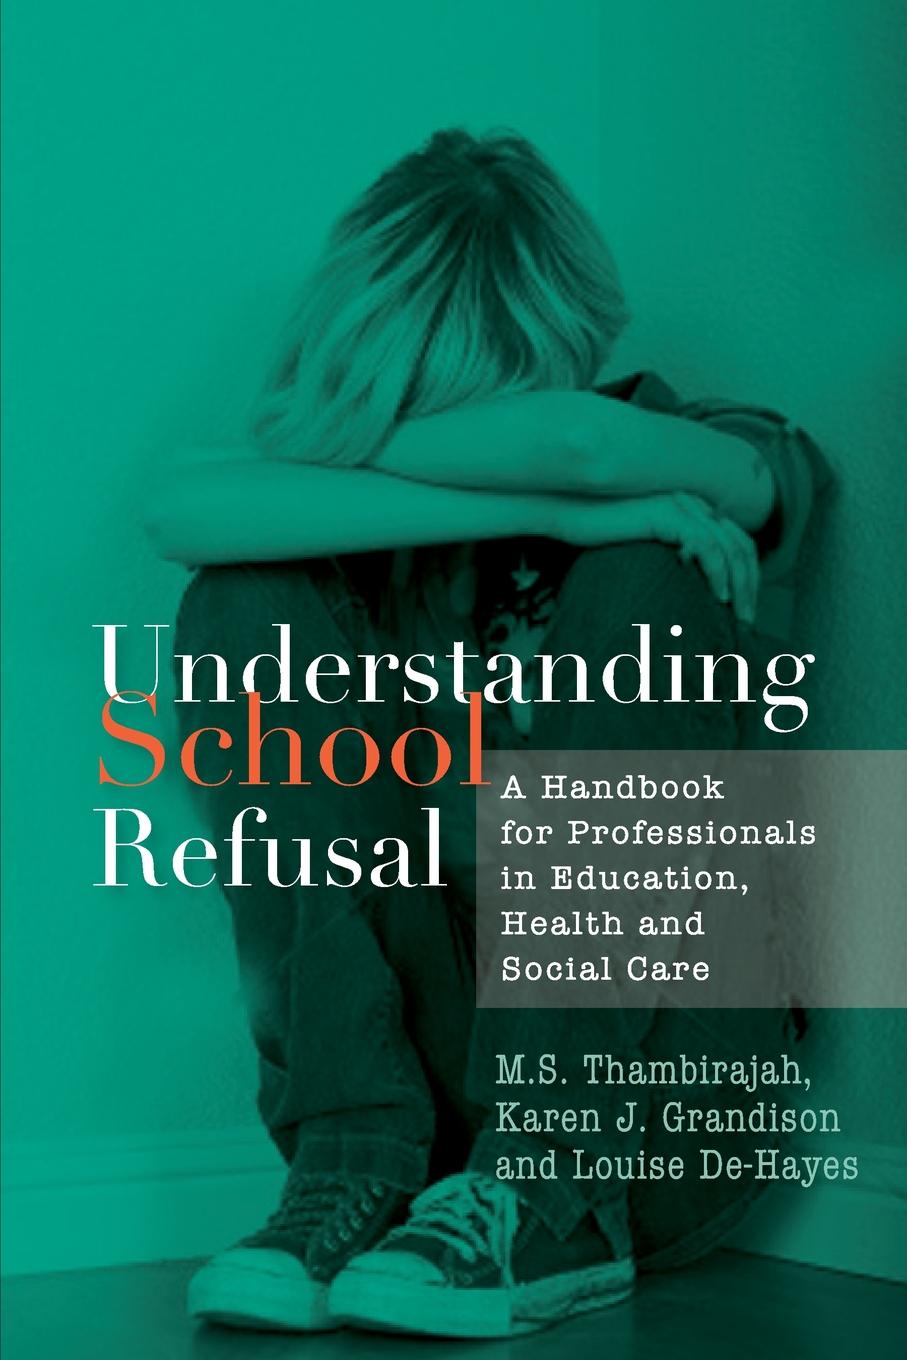 Understanding School Refusal. A Handbook for Professionals in Education, Health and Social Care